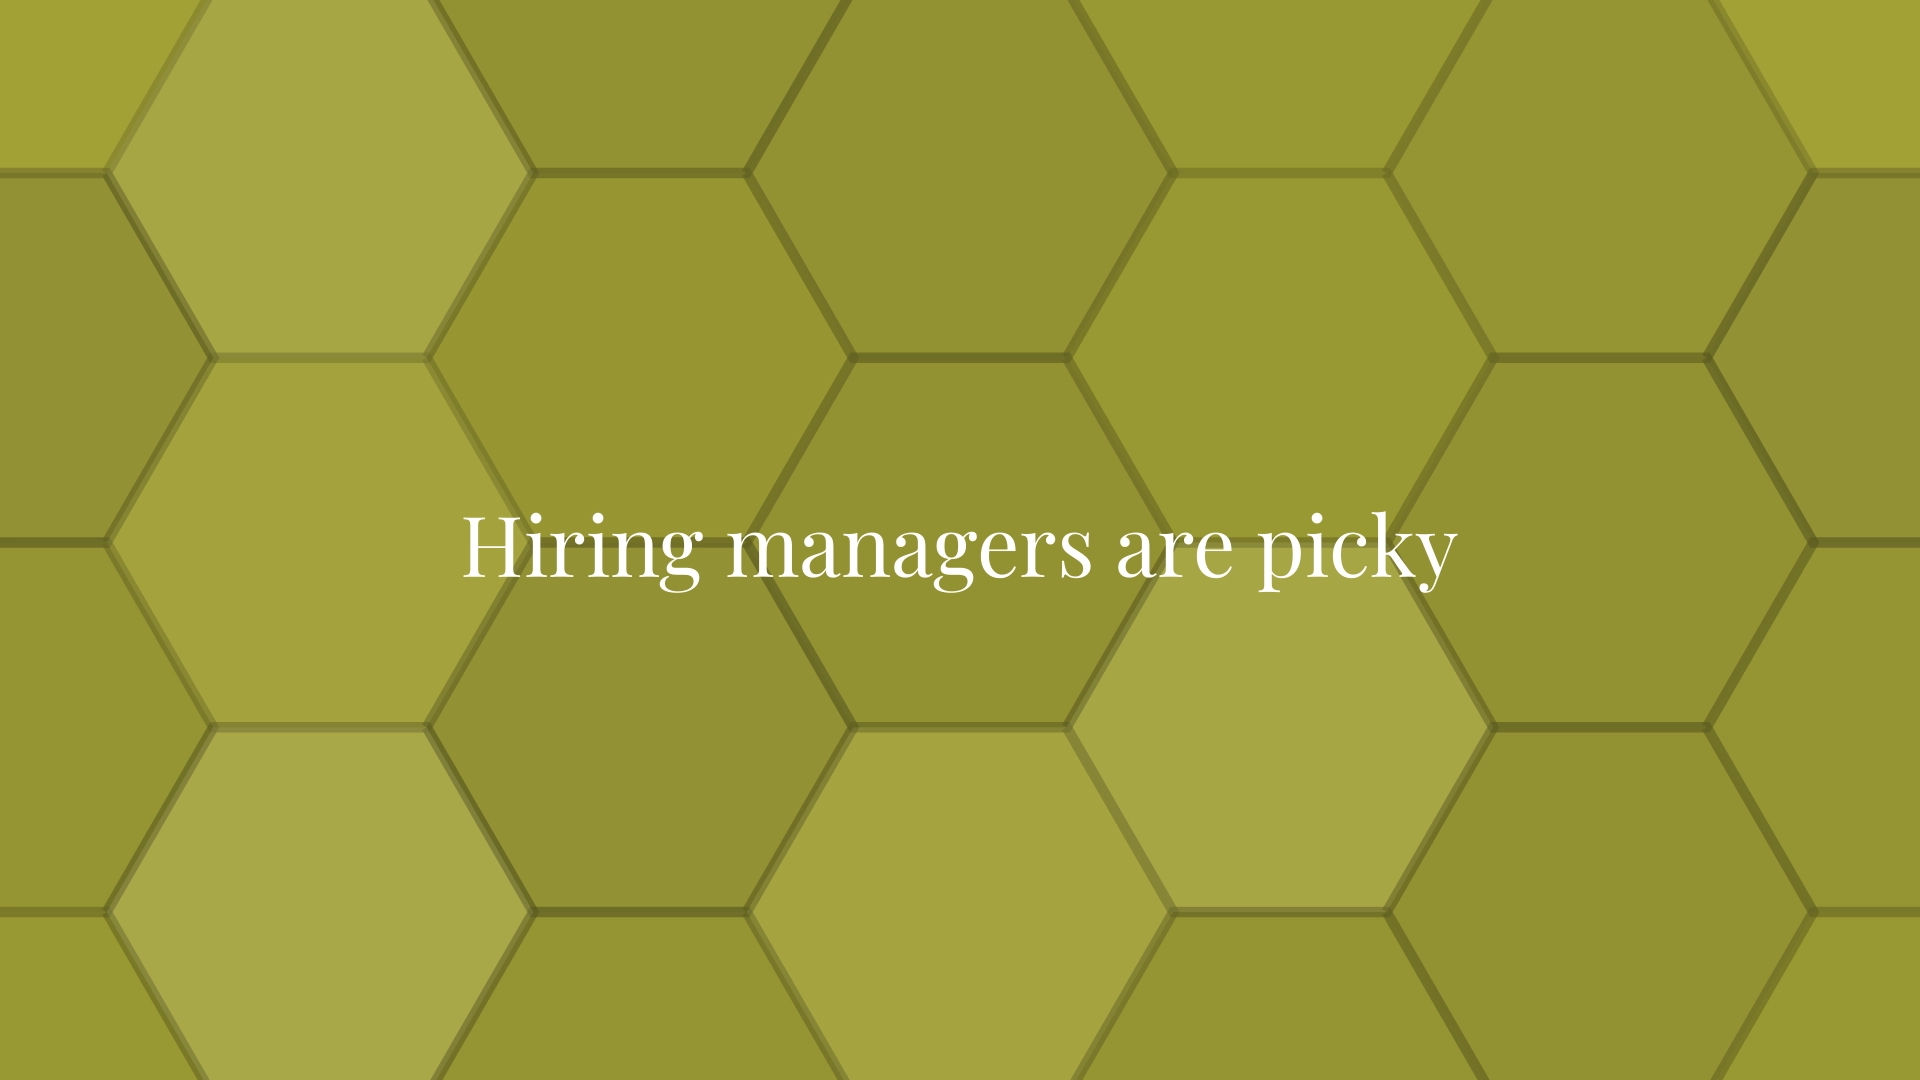 Hiring managers are picky